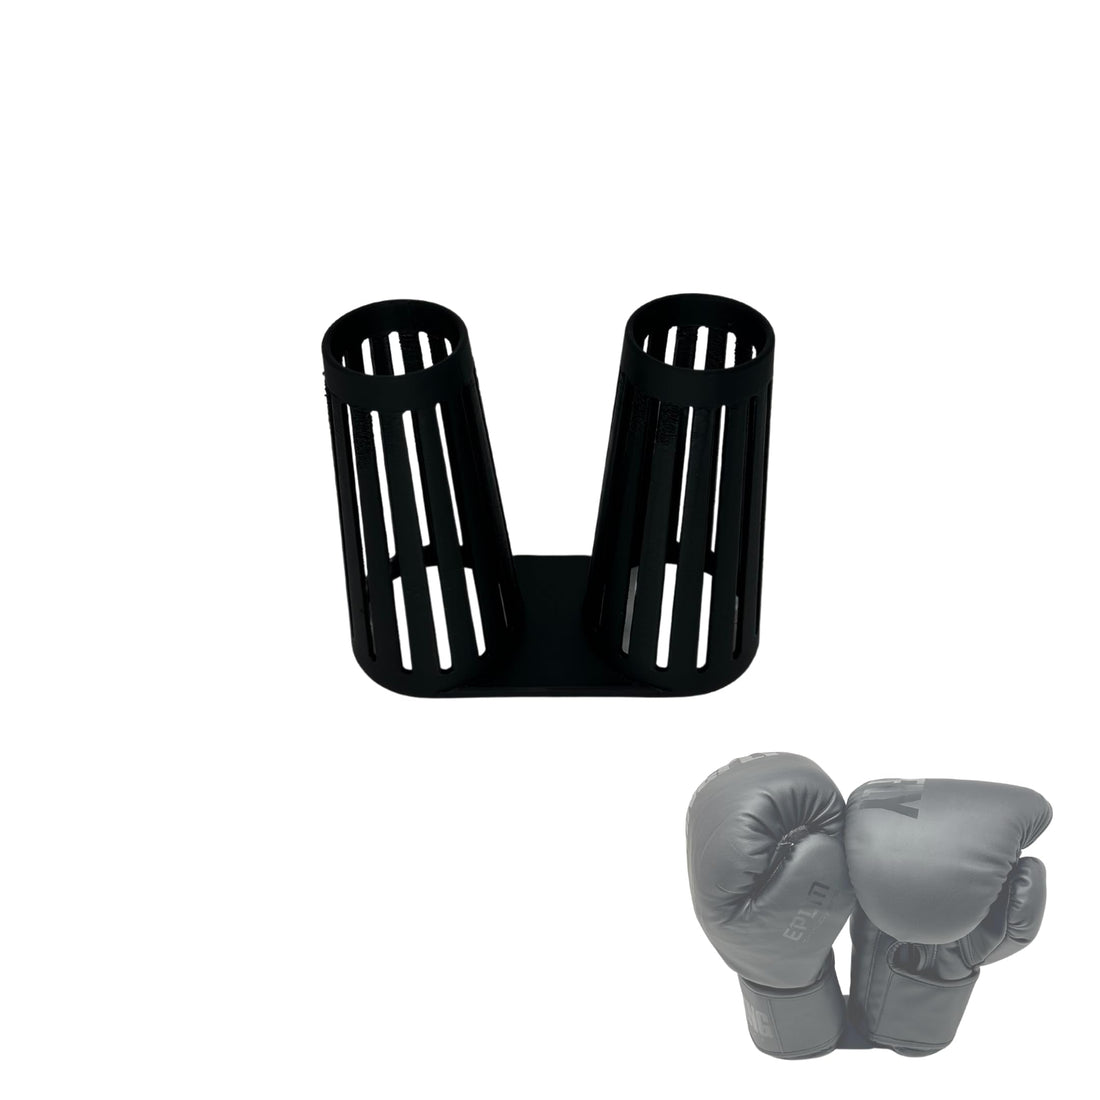 Chatelet Boxing Glove Wall Mount Dryer | Hang Up Boxing Gloves to Dry Out | Wall Display for Gloves | Made in USA